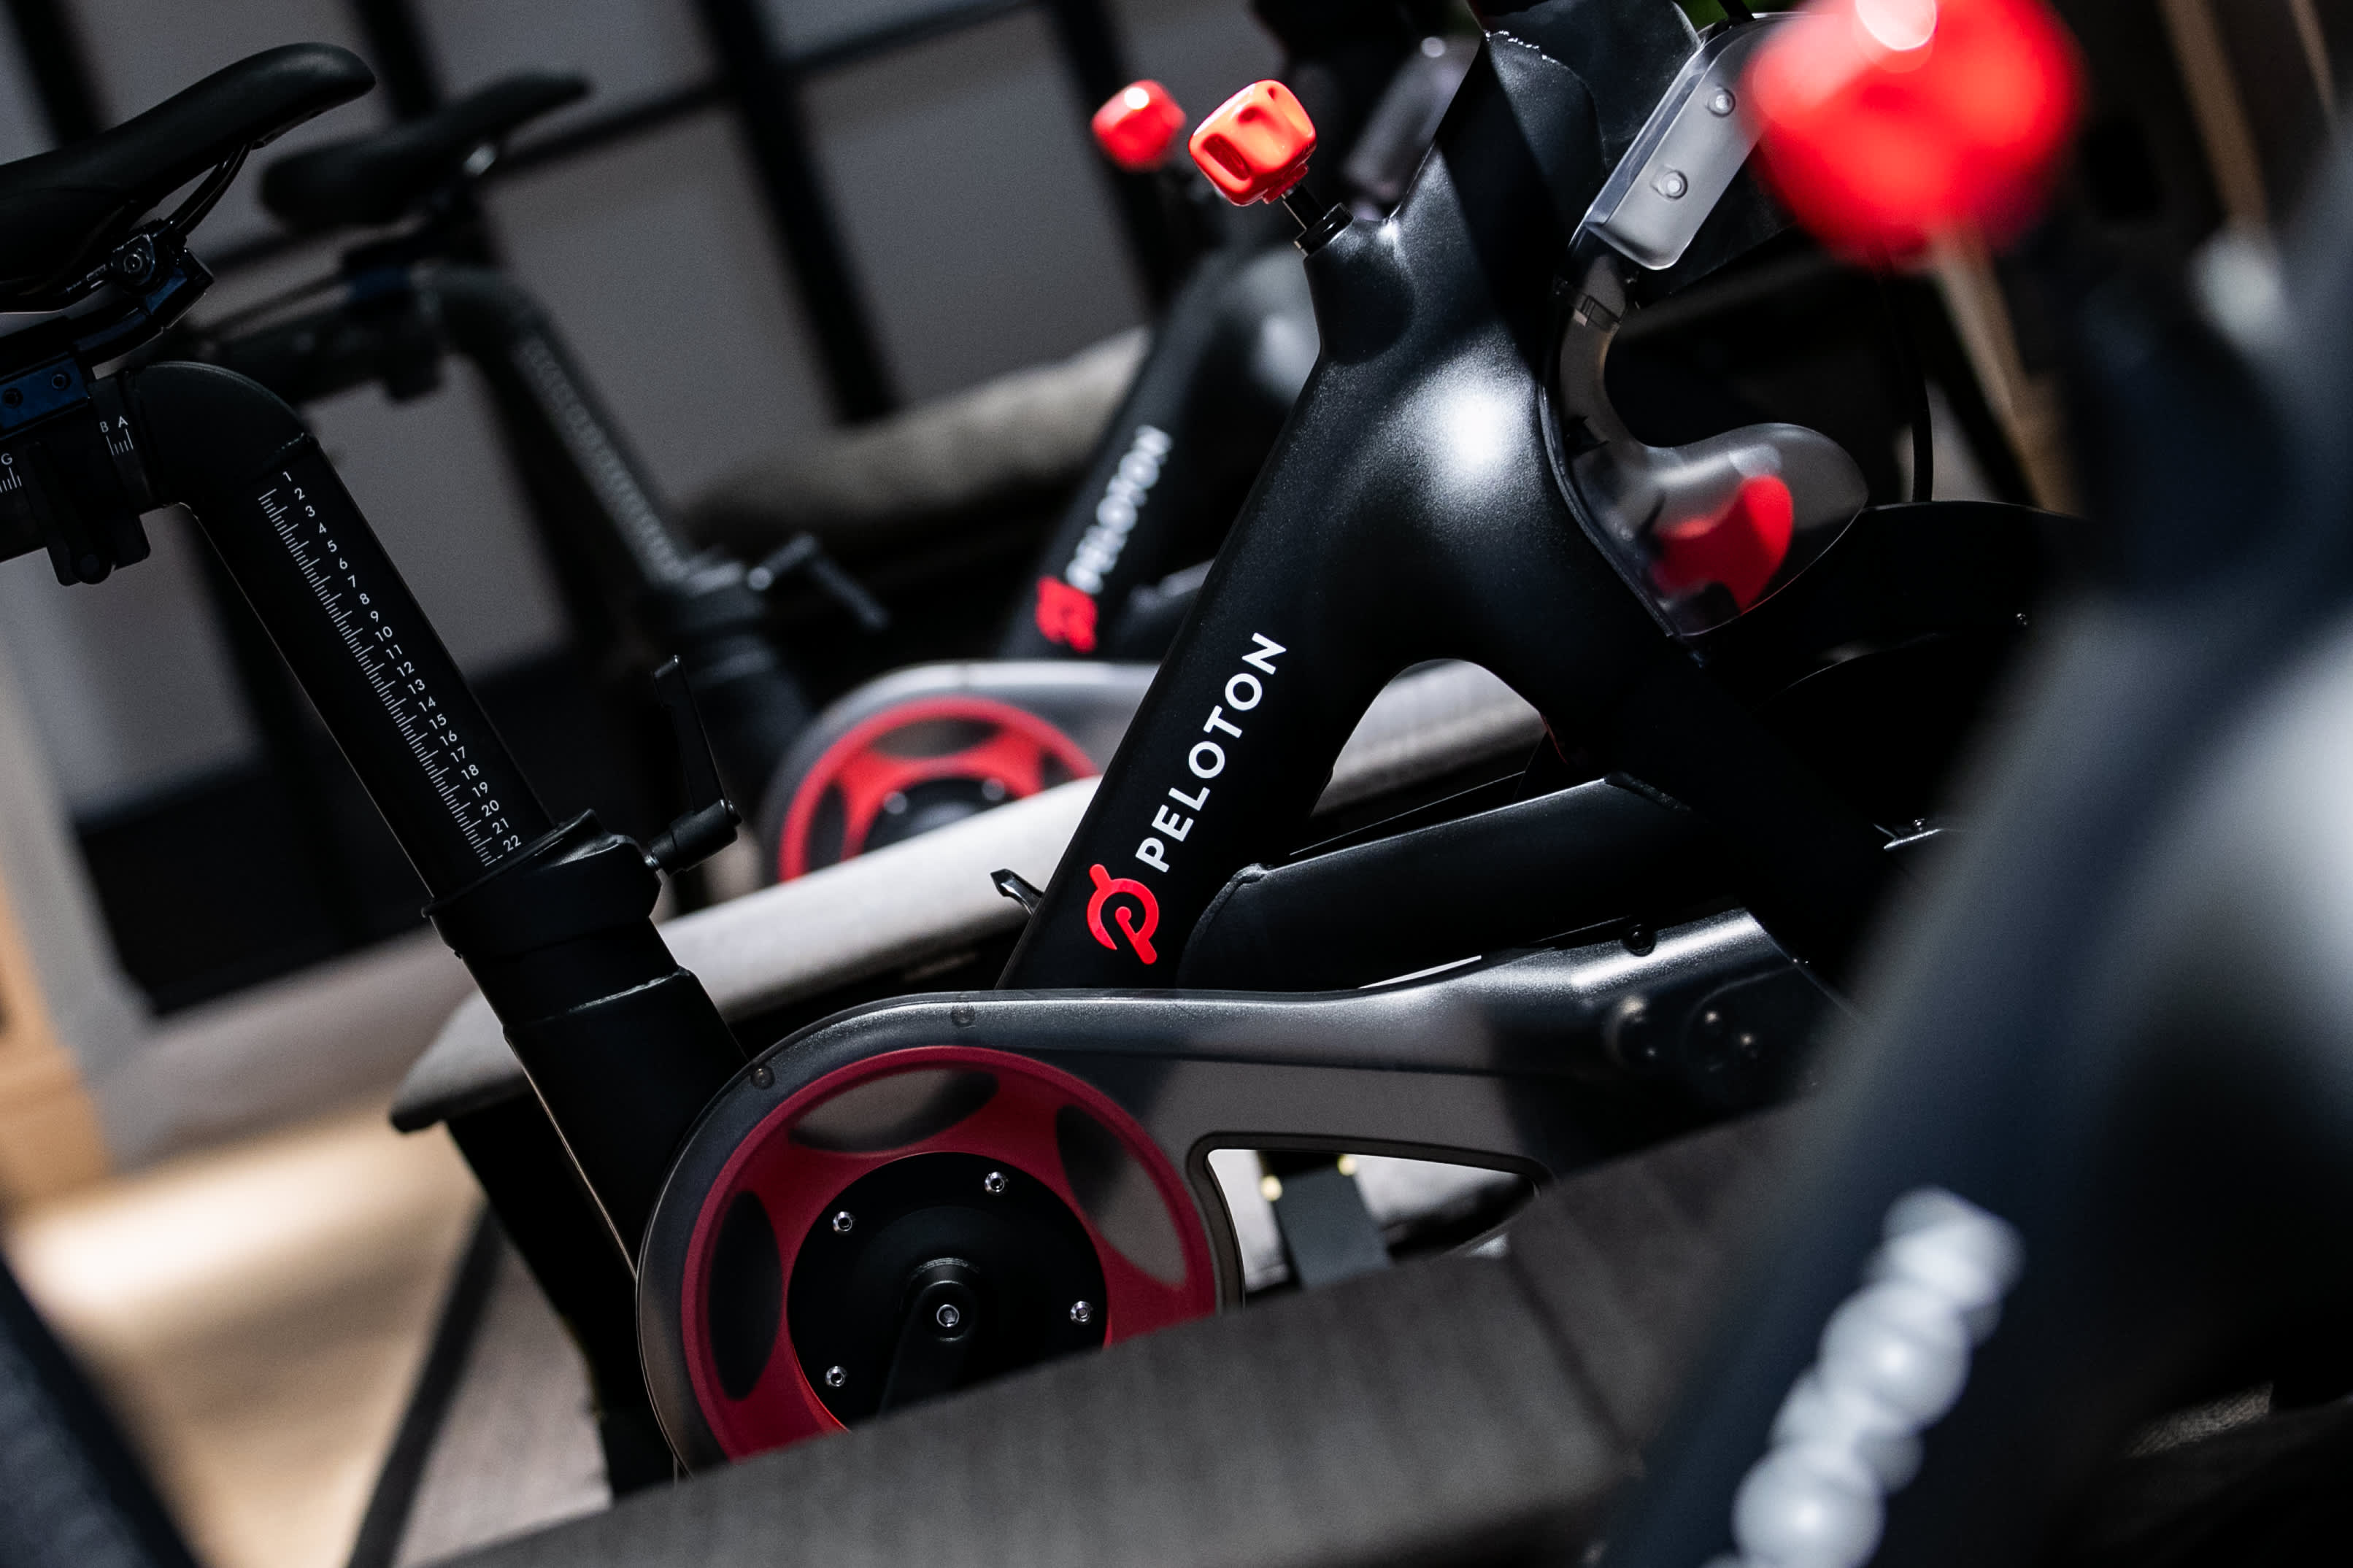 Peloton's brand gets slammed again after an unfavorable portrayal in  'Billions